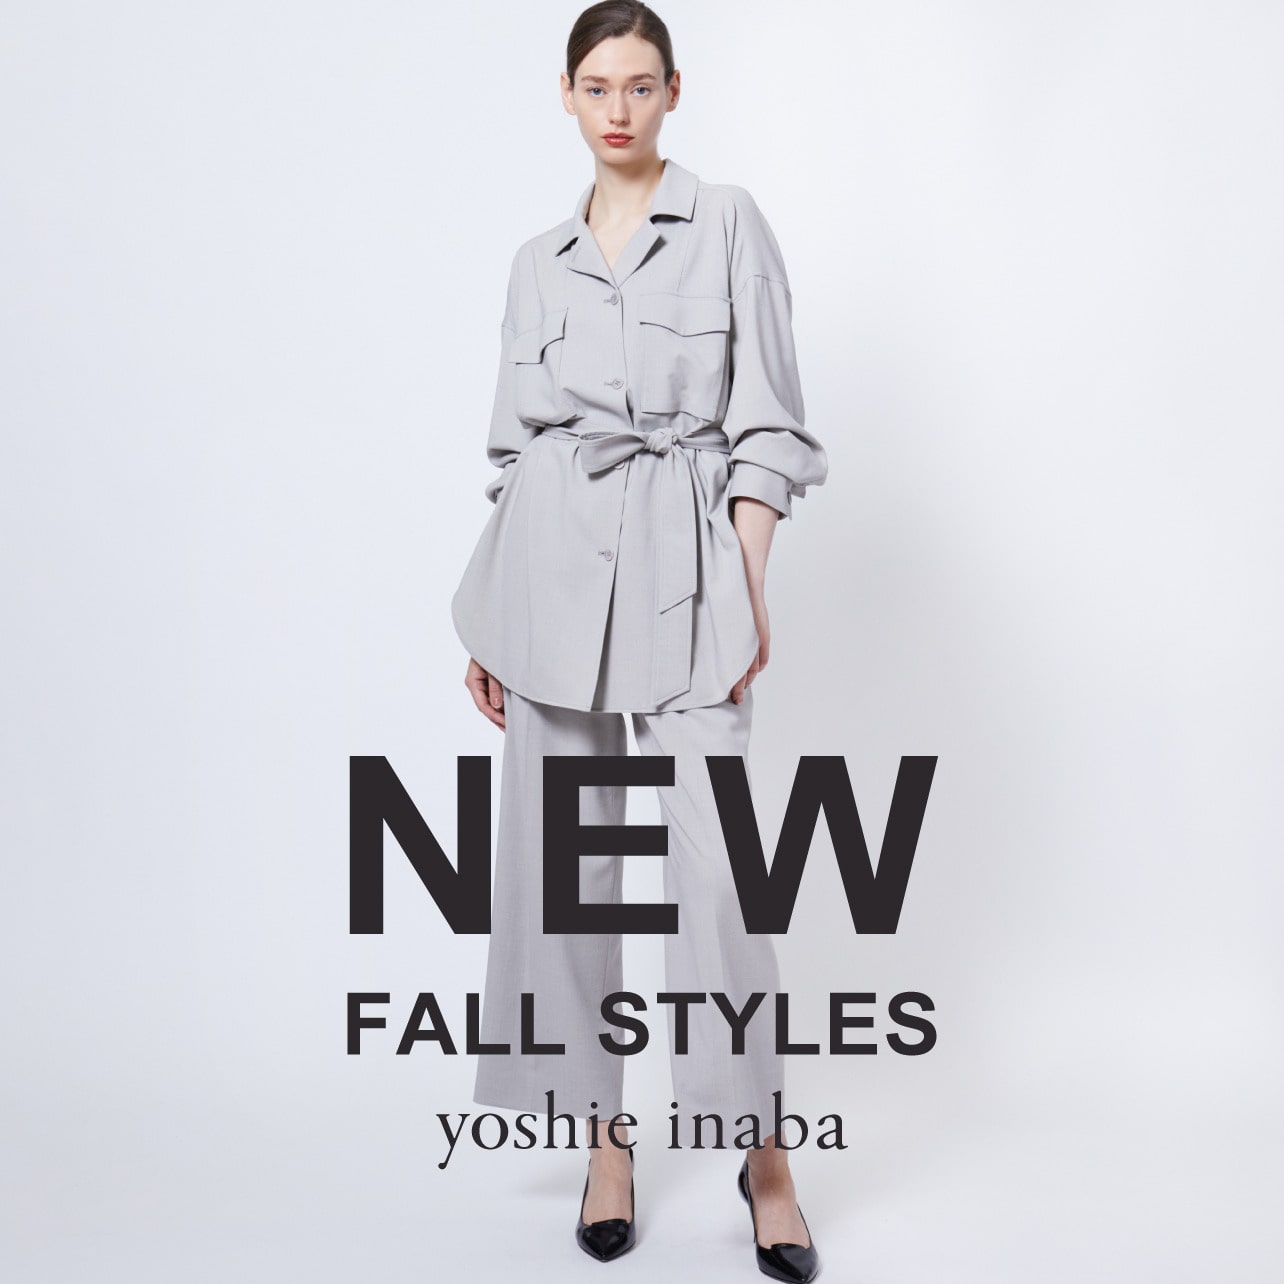 NEW FALL STYLES